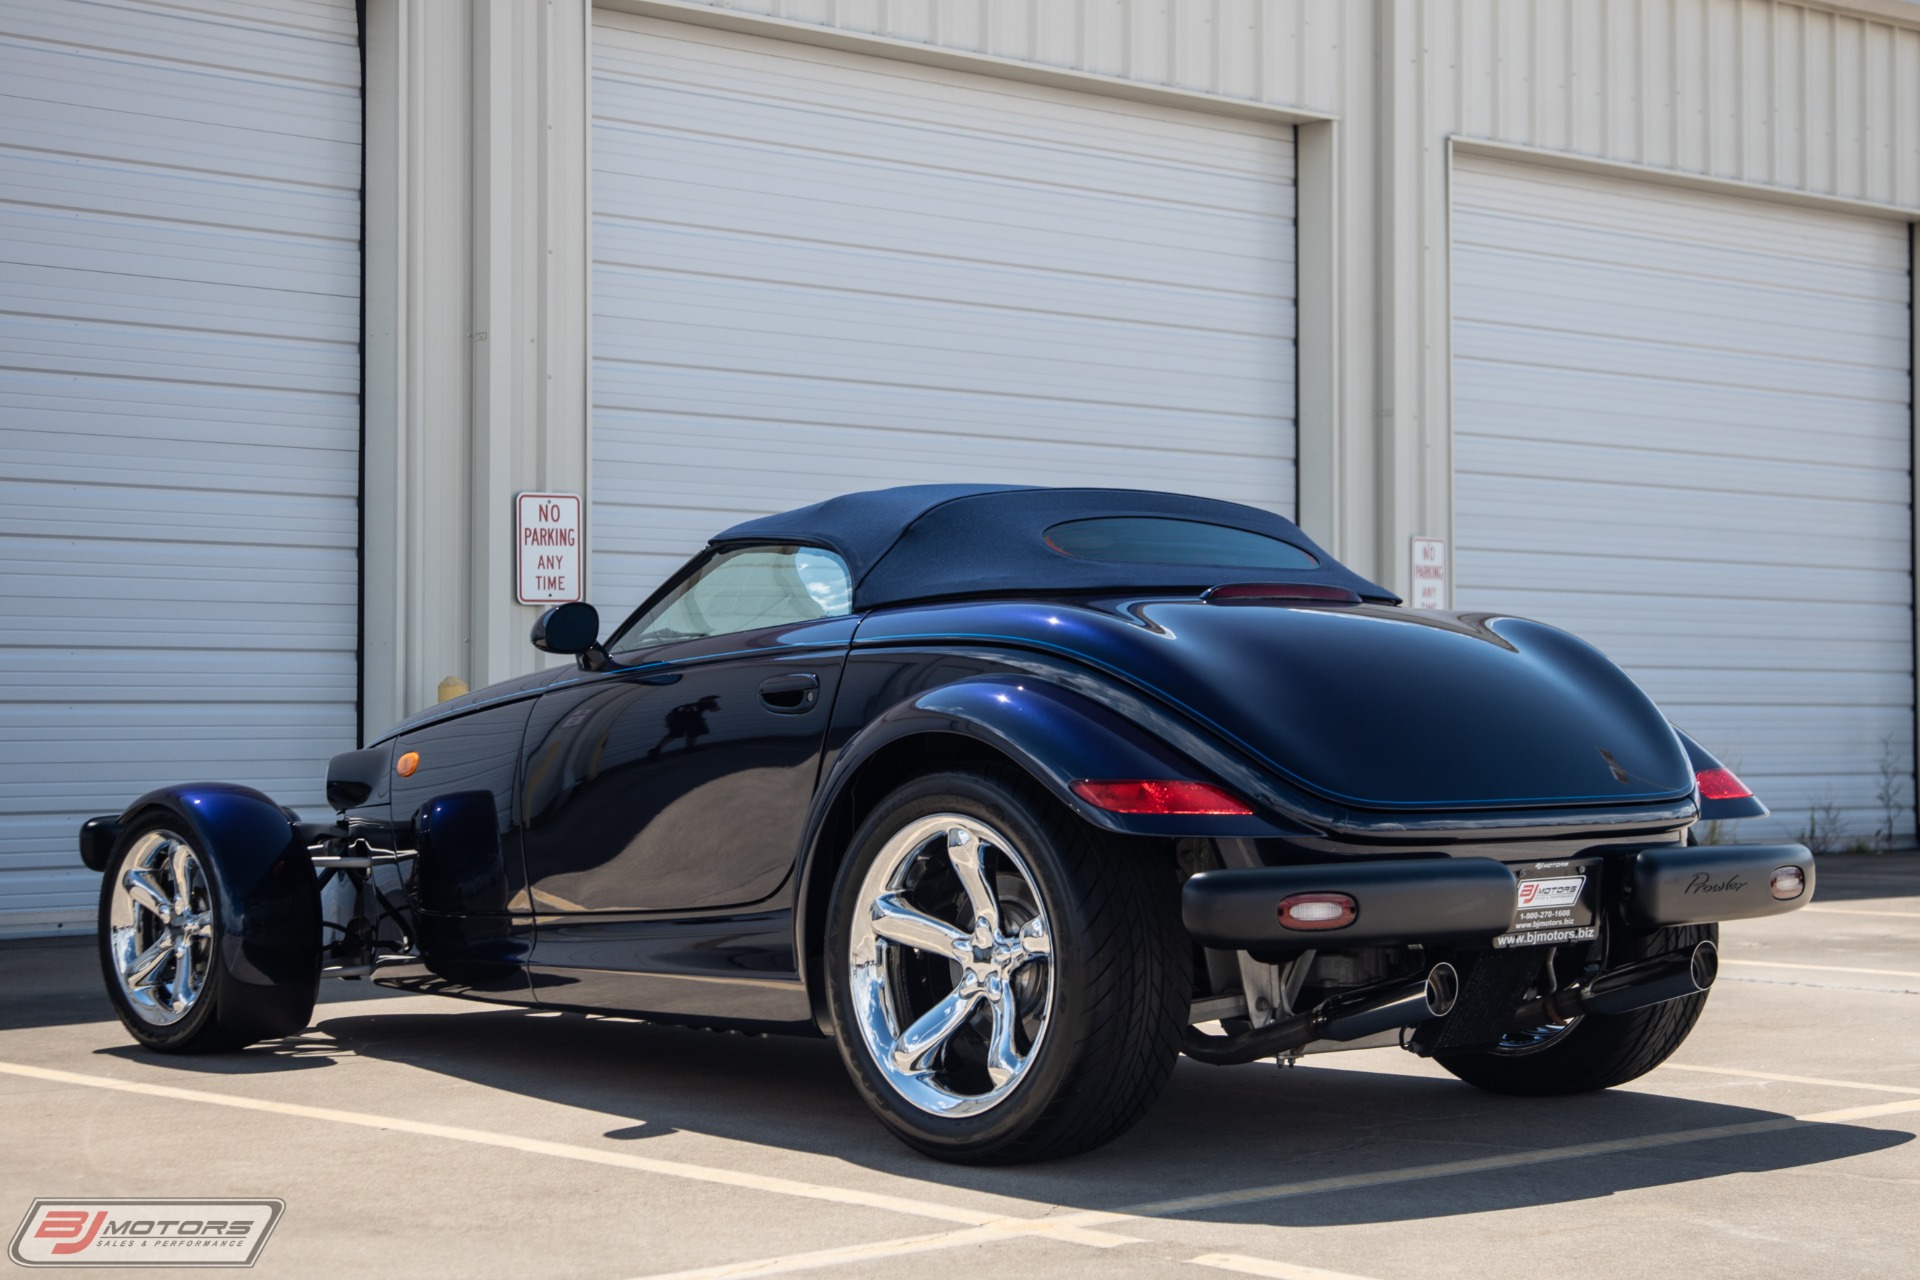 Used-2001-Chrysler-Prowler-Mulholland-Edition